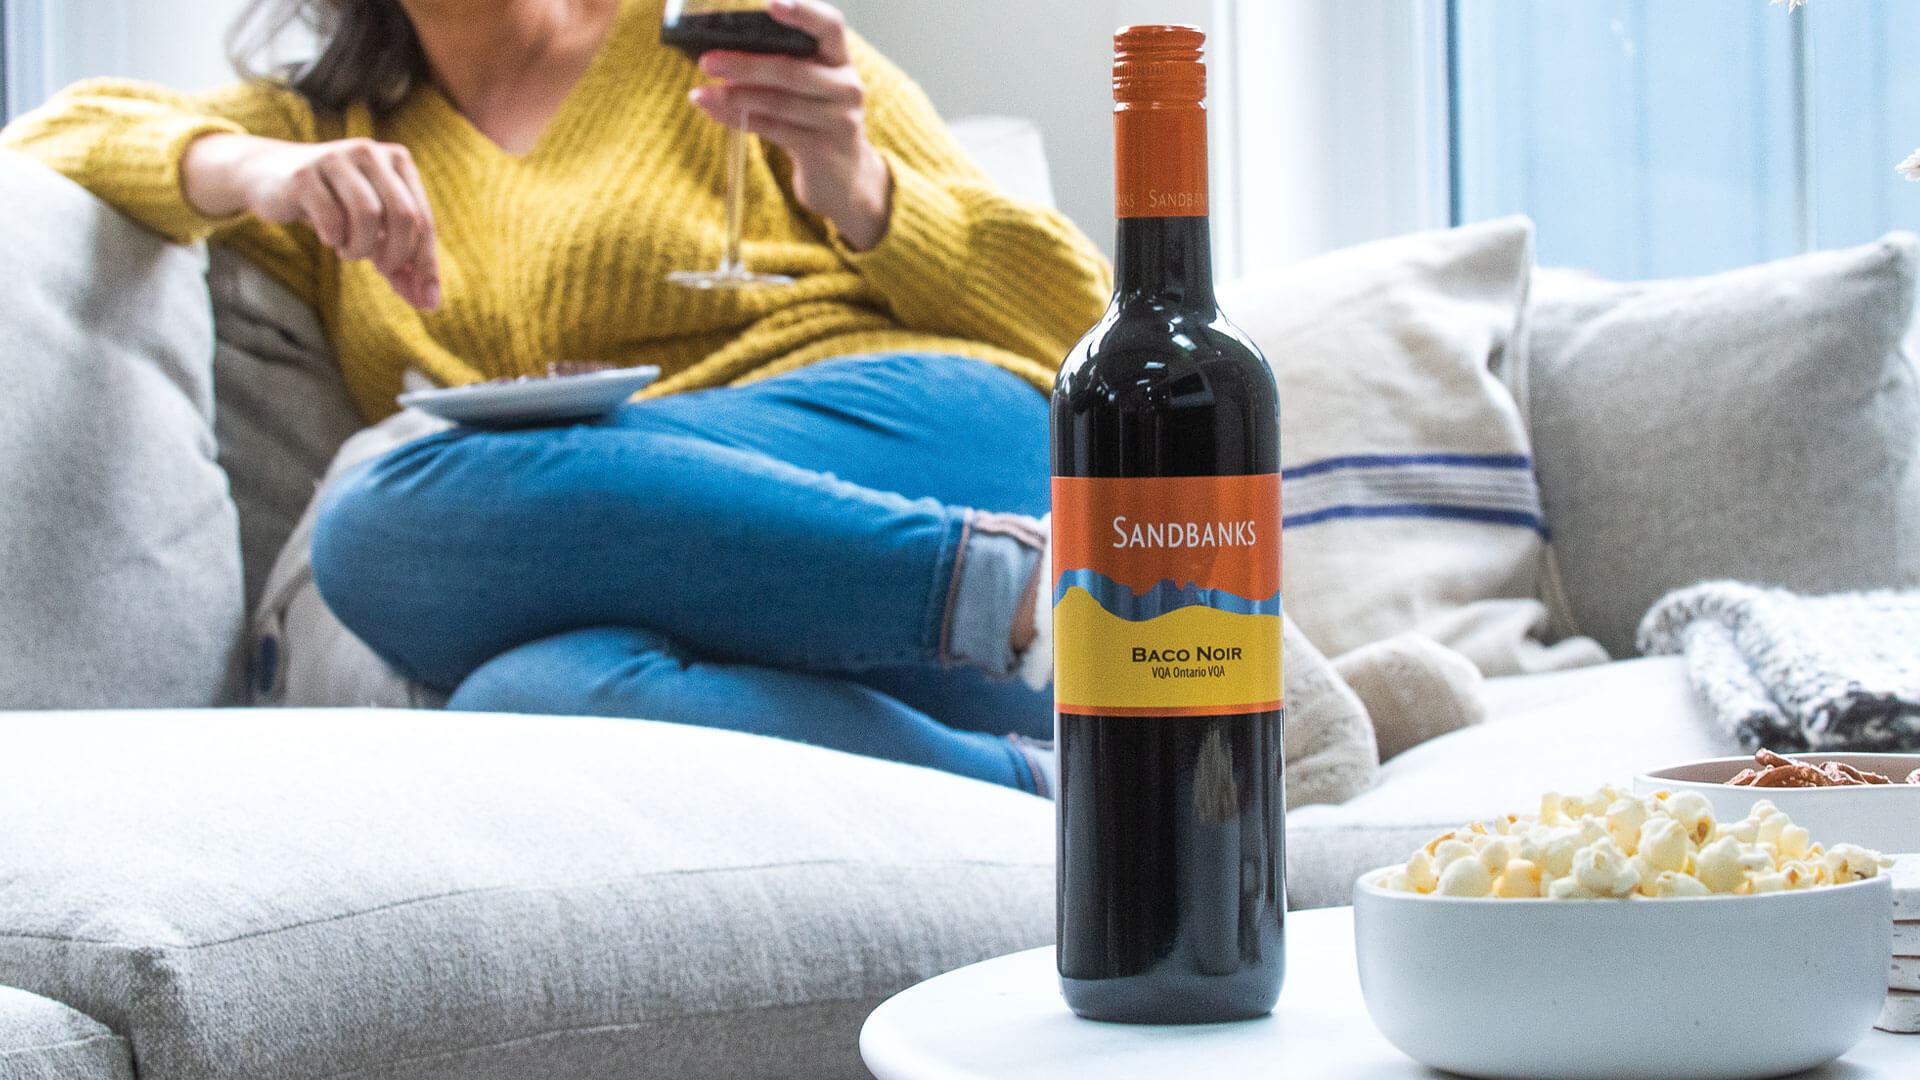 Wine enthusiast enjoying a glass of Sandbanks Baco Noir on the sofa with some popcorn nearby. 